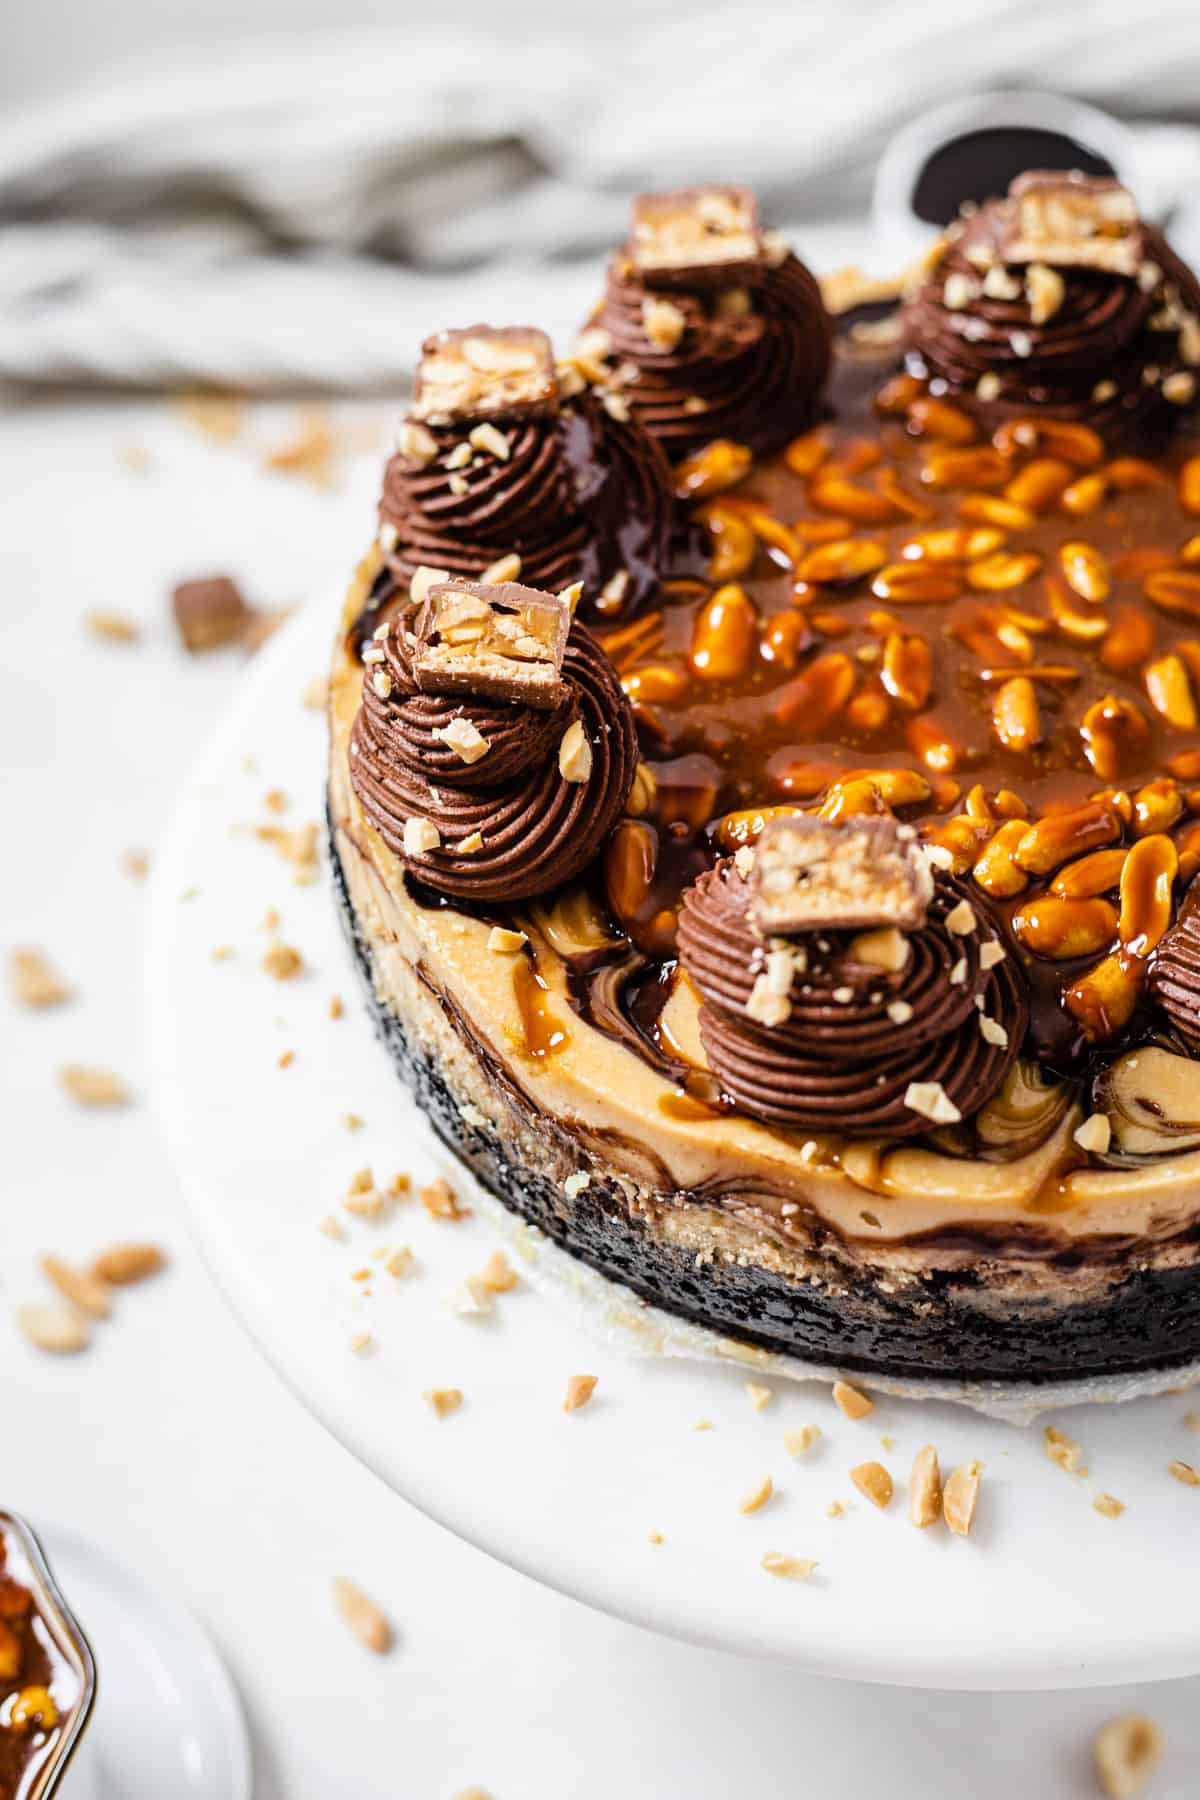 whole cheesecake on a cake stand with chopped peanuts scattered around it